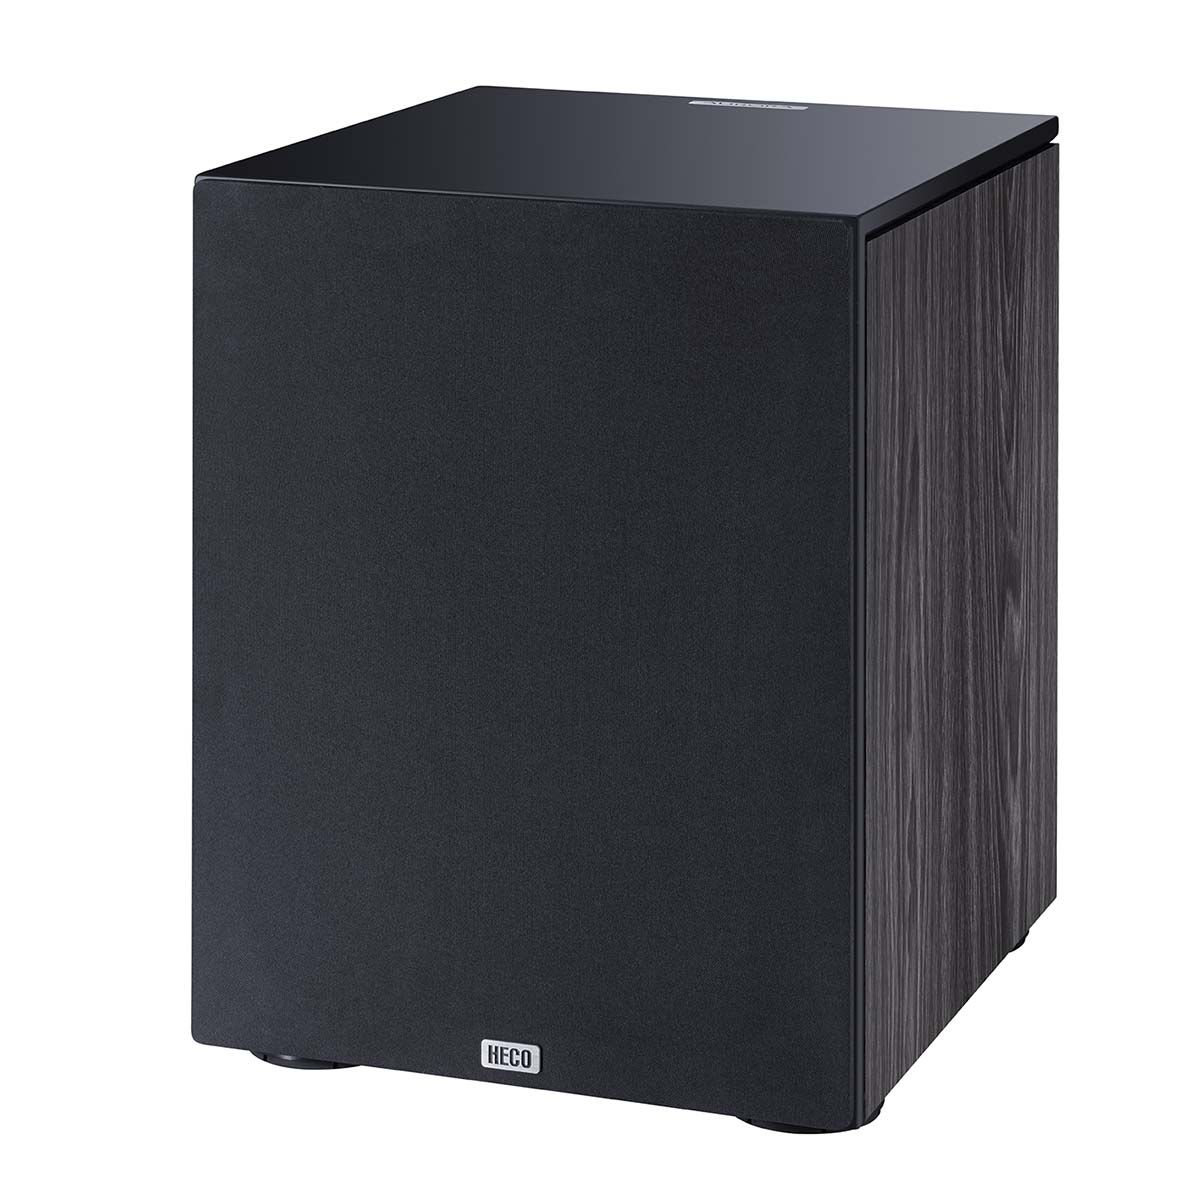 HECO Aurora 30A Subwoofer w/ grill